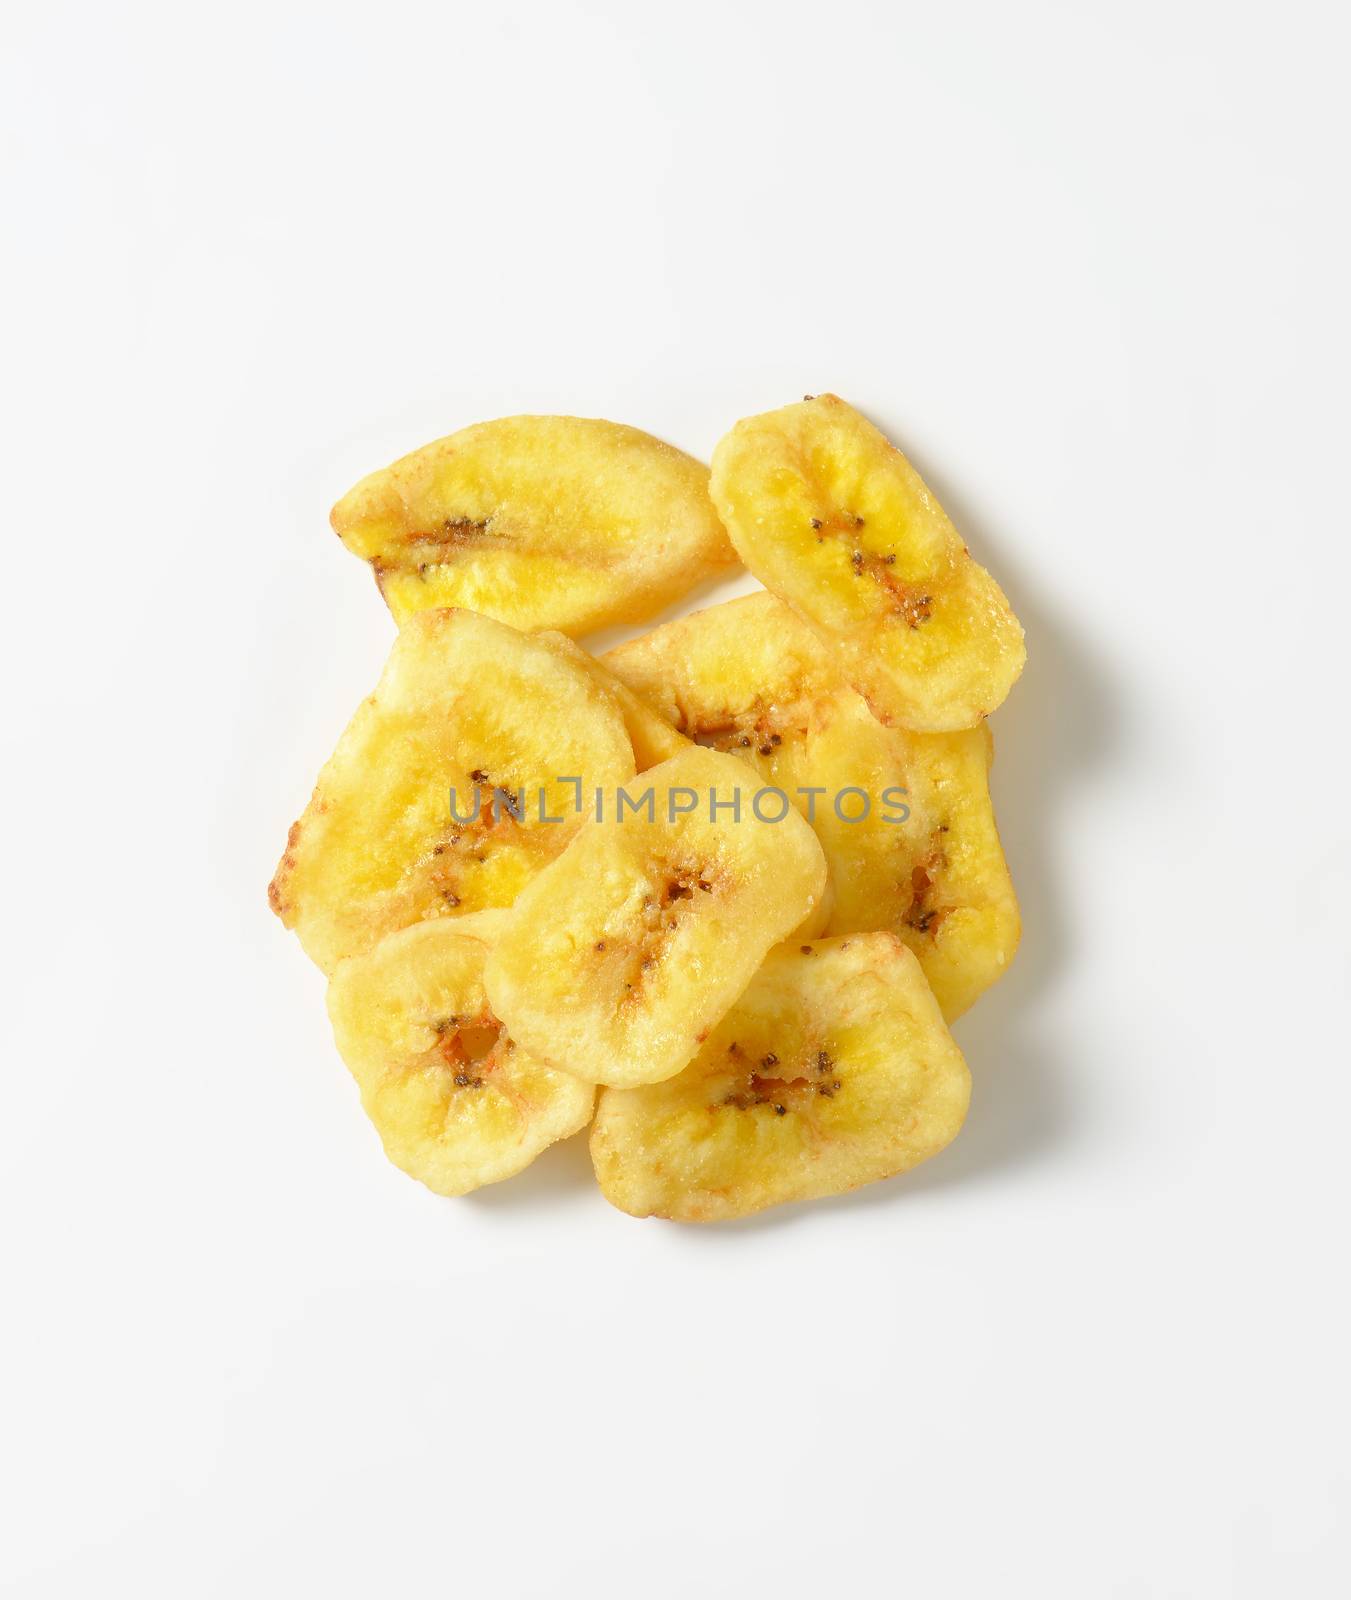 Dried banana chips by Digifoodstock